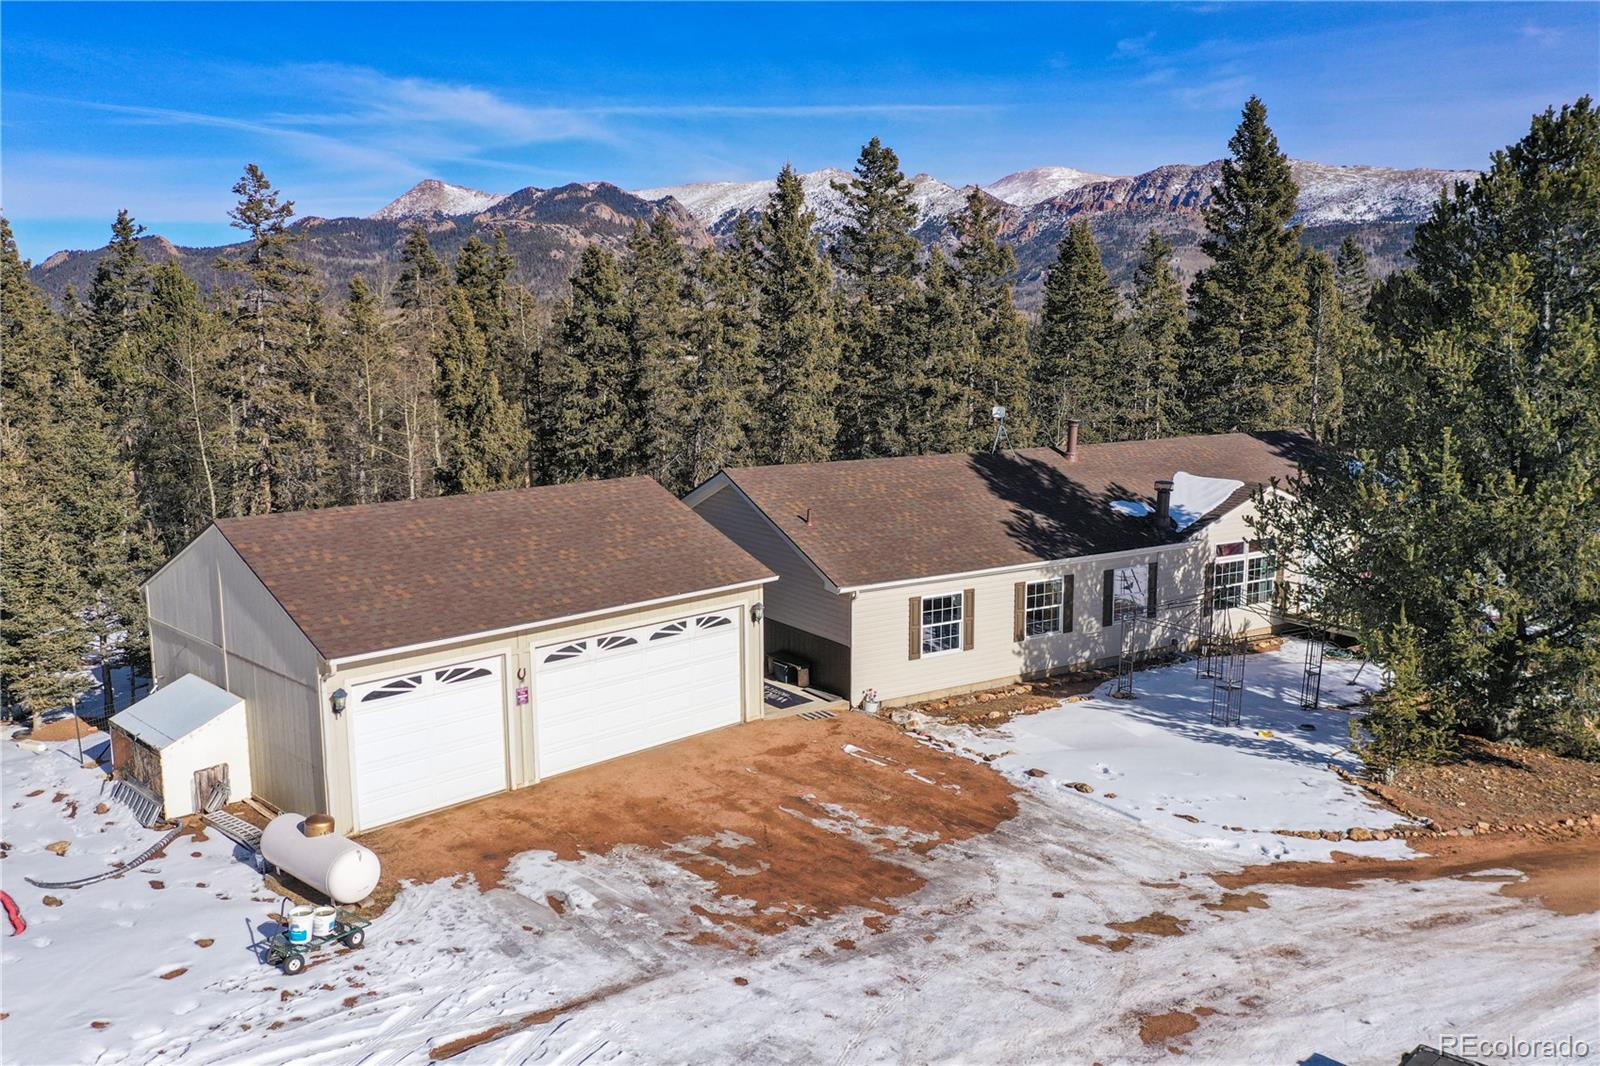 681  county road 61 , Cripple Creek sold home. Closed on 2024-03-28 for $420,000.